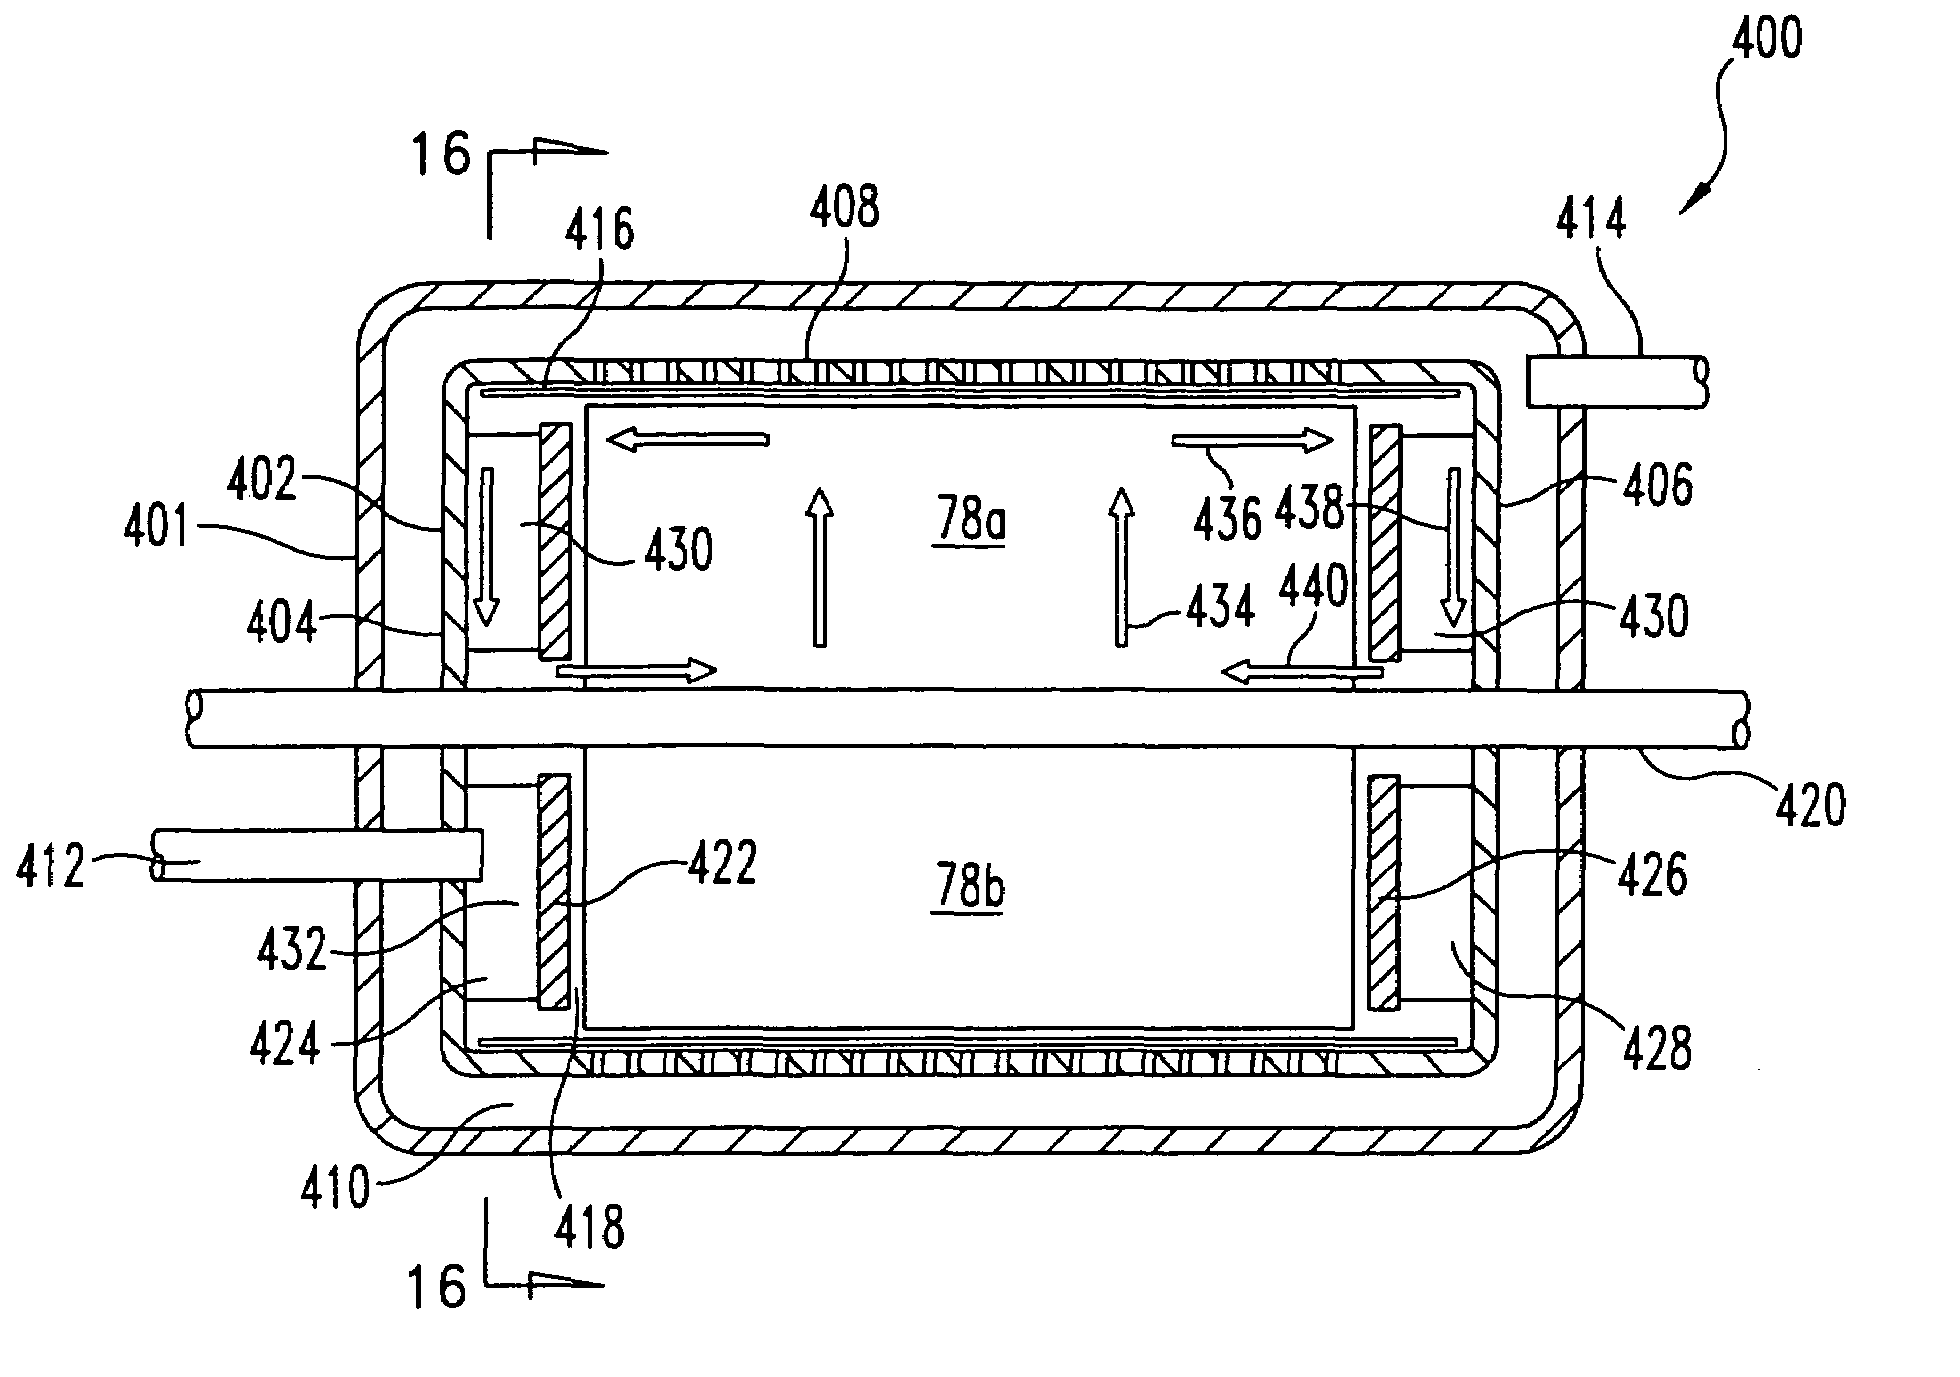 Sorbent reactor for extracorporeal blood treatment systems, peritoneal dialysis systems, and other body fluid treatment systems